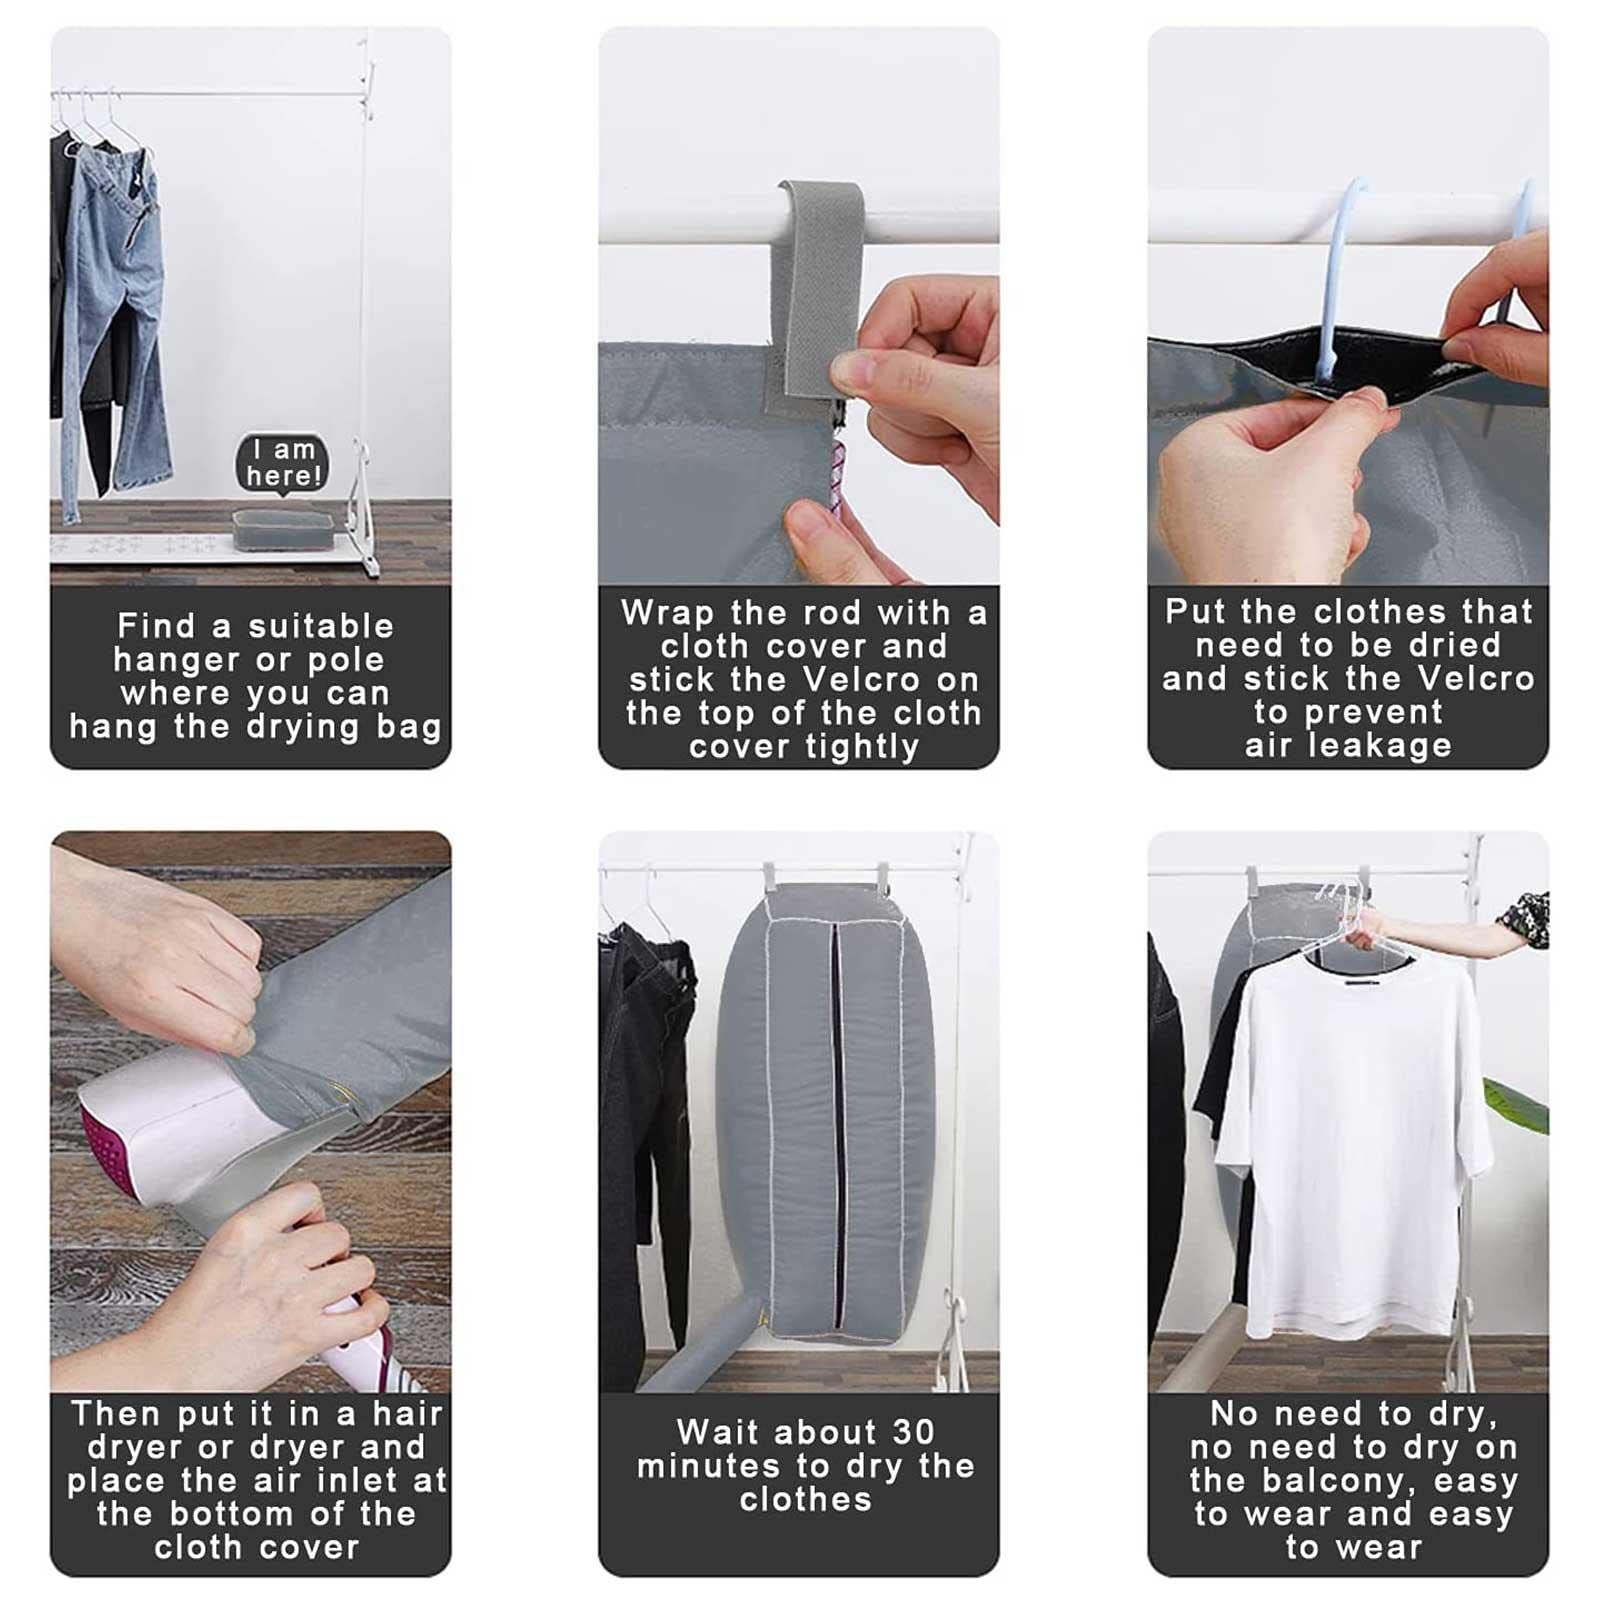 Attracting Portable Clothes Dryer Foldable Apartment Clothes Dryer,Cover for Dry Clothes,Travel Light Dryer,Quick Drying(Without Dryer)